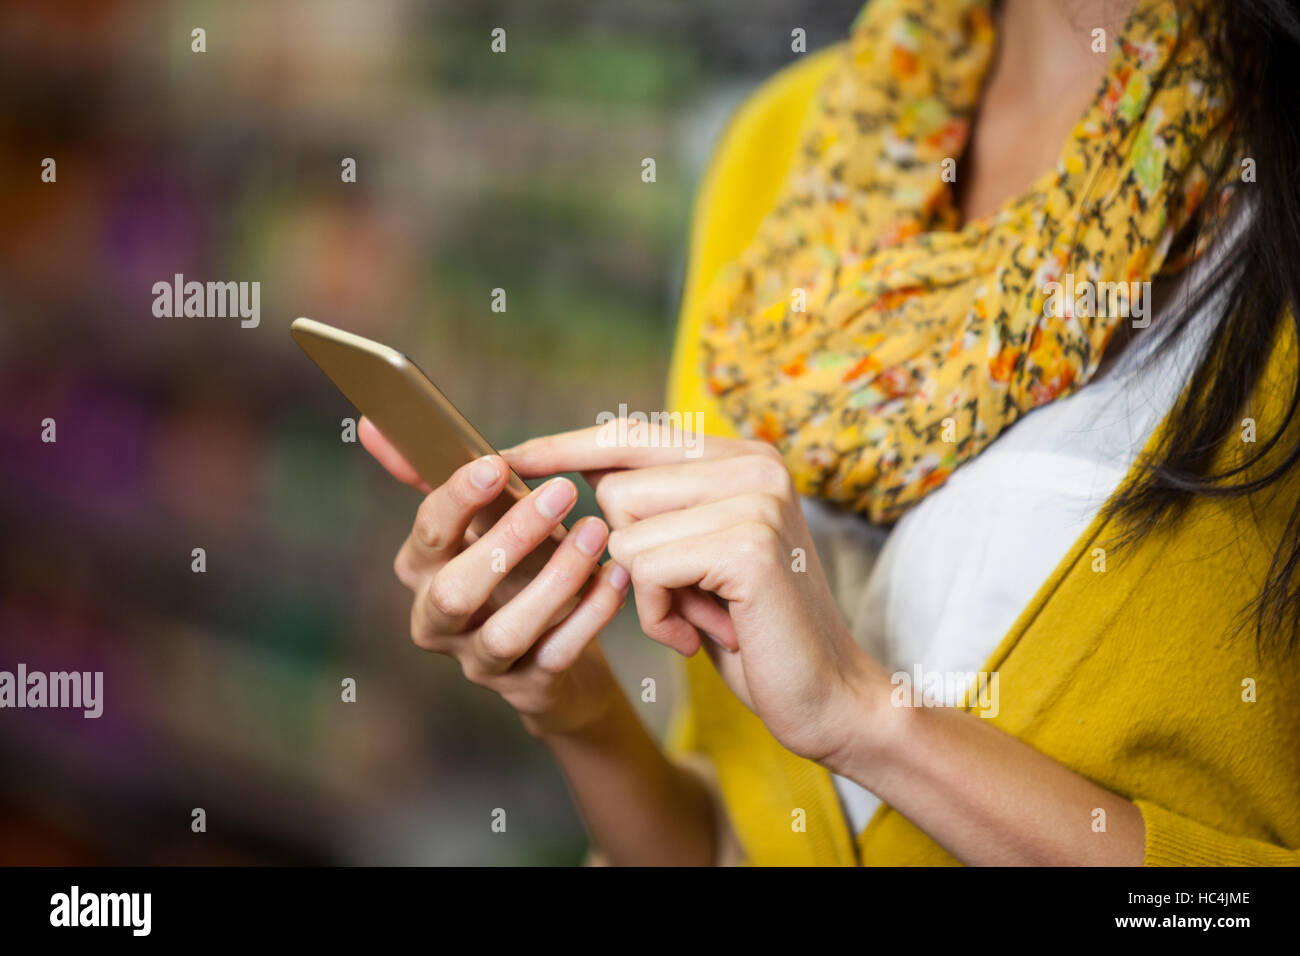 Woman using mobile phone in grocery section Stock Photo